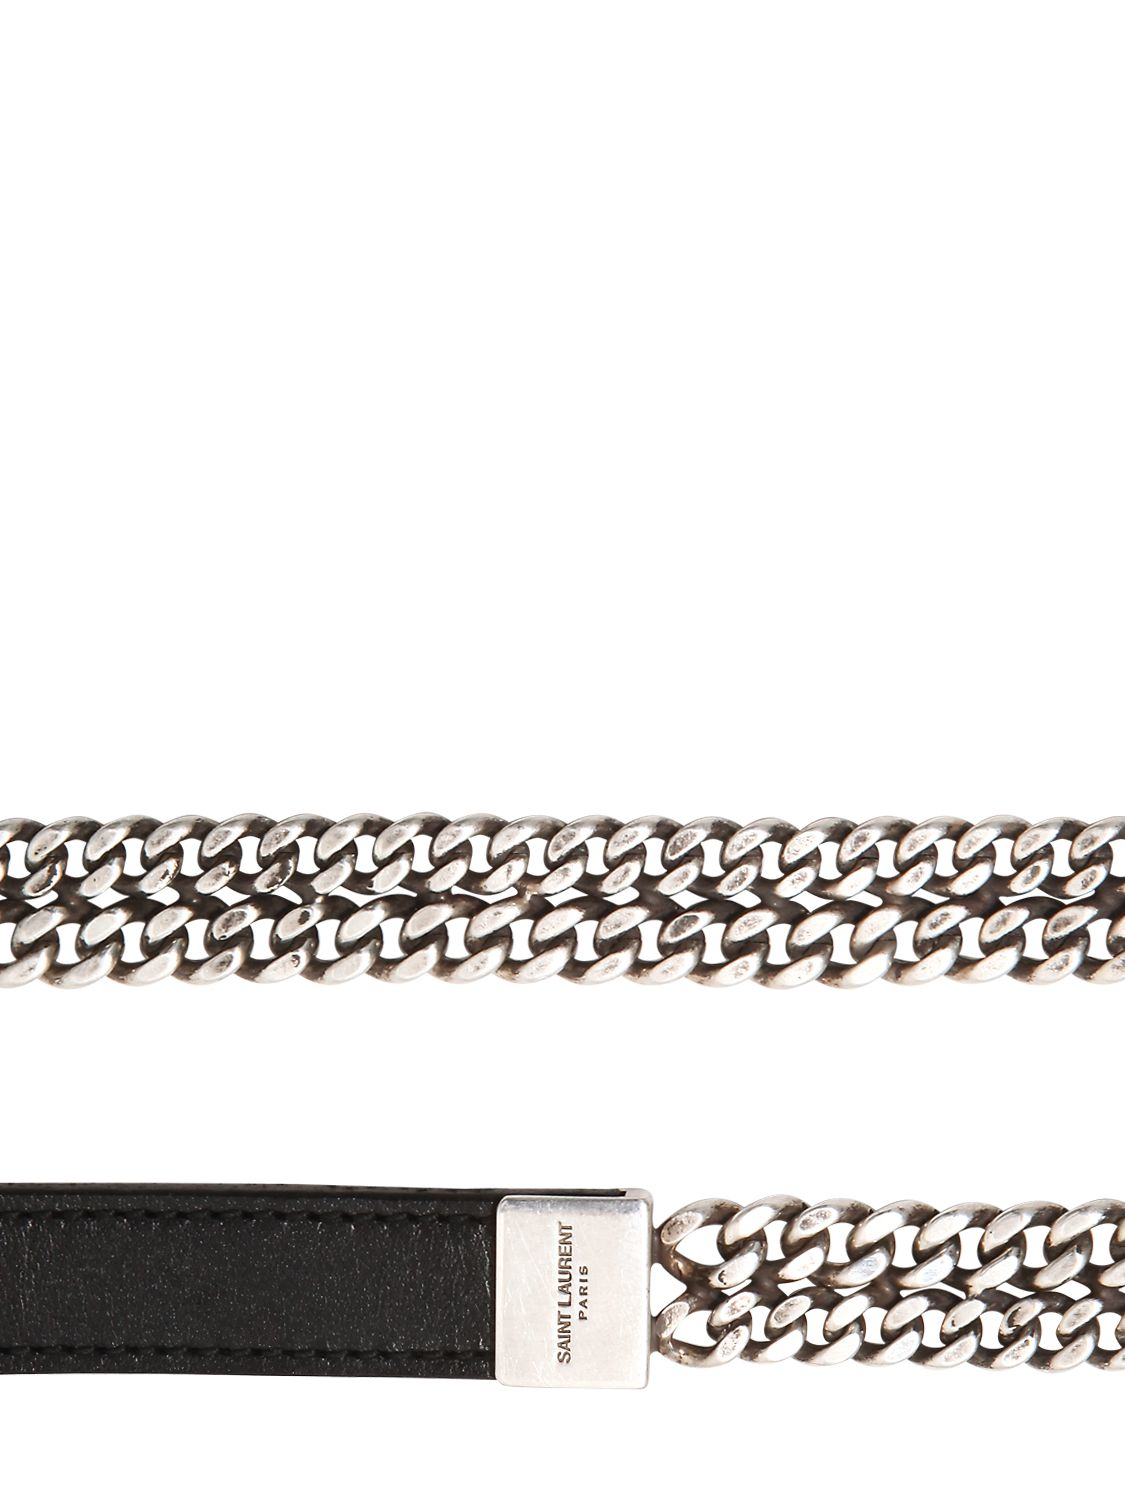 Saint Laurent 15mm Leather Belt With Chain in Black | Lyst